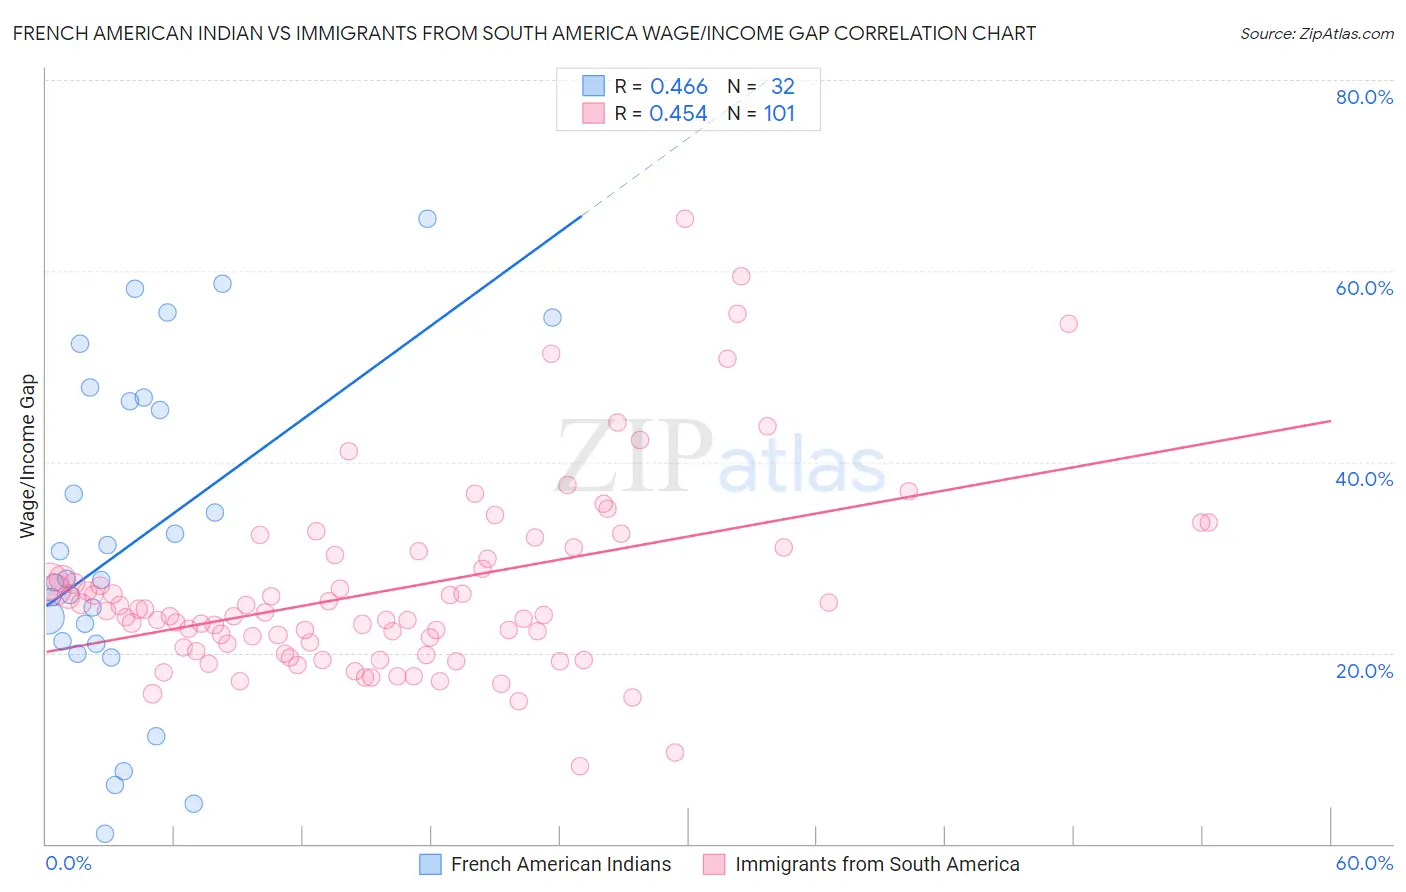 French American Indian vs Immigrants from South America Wage/Income Gap